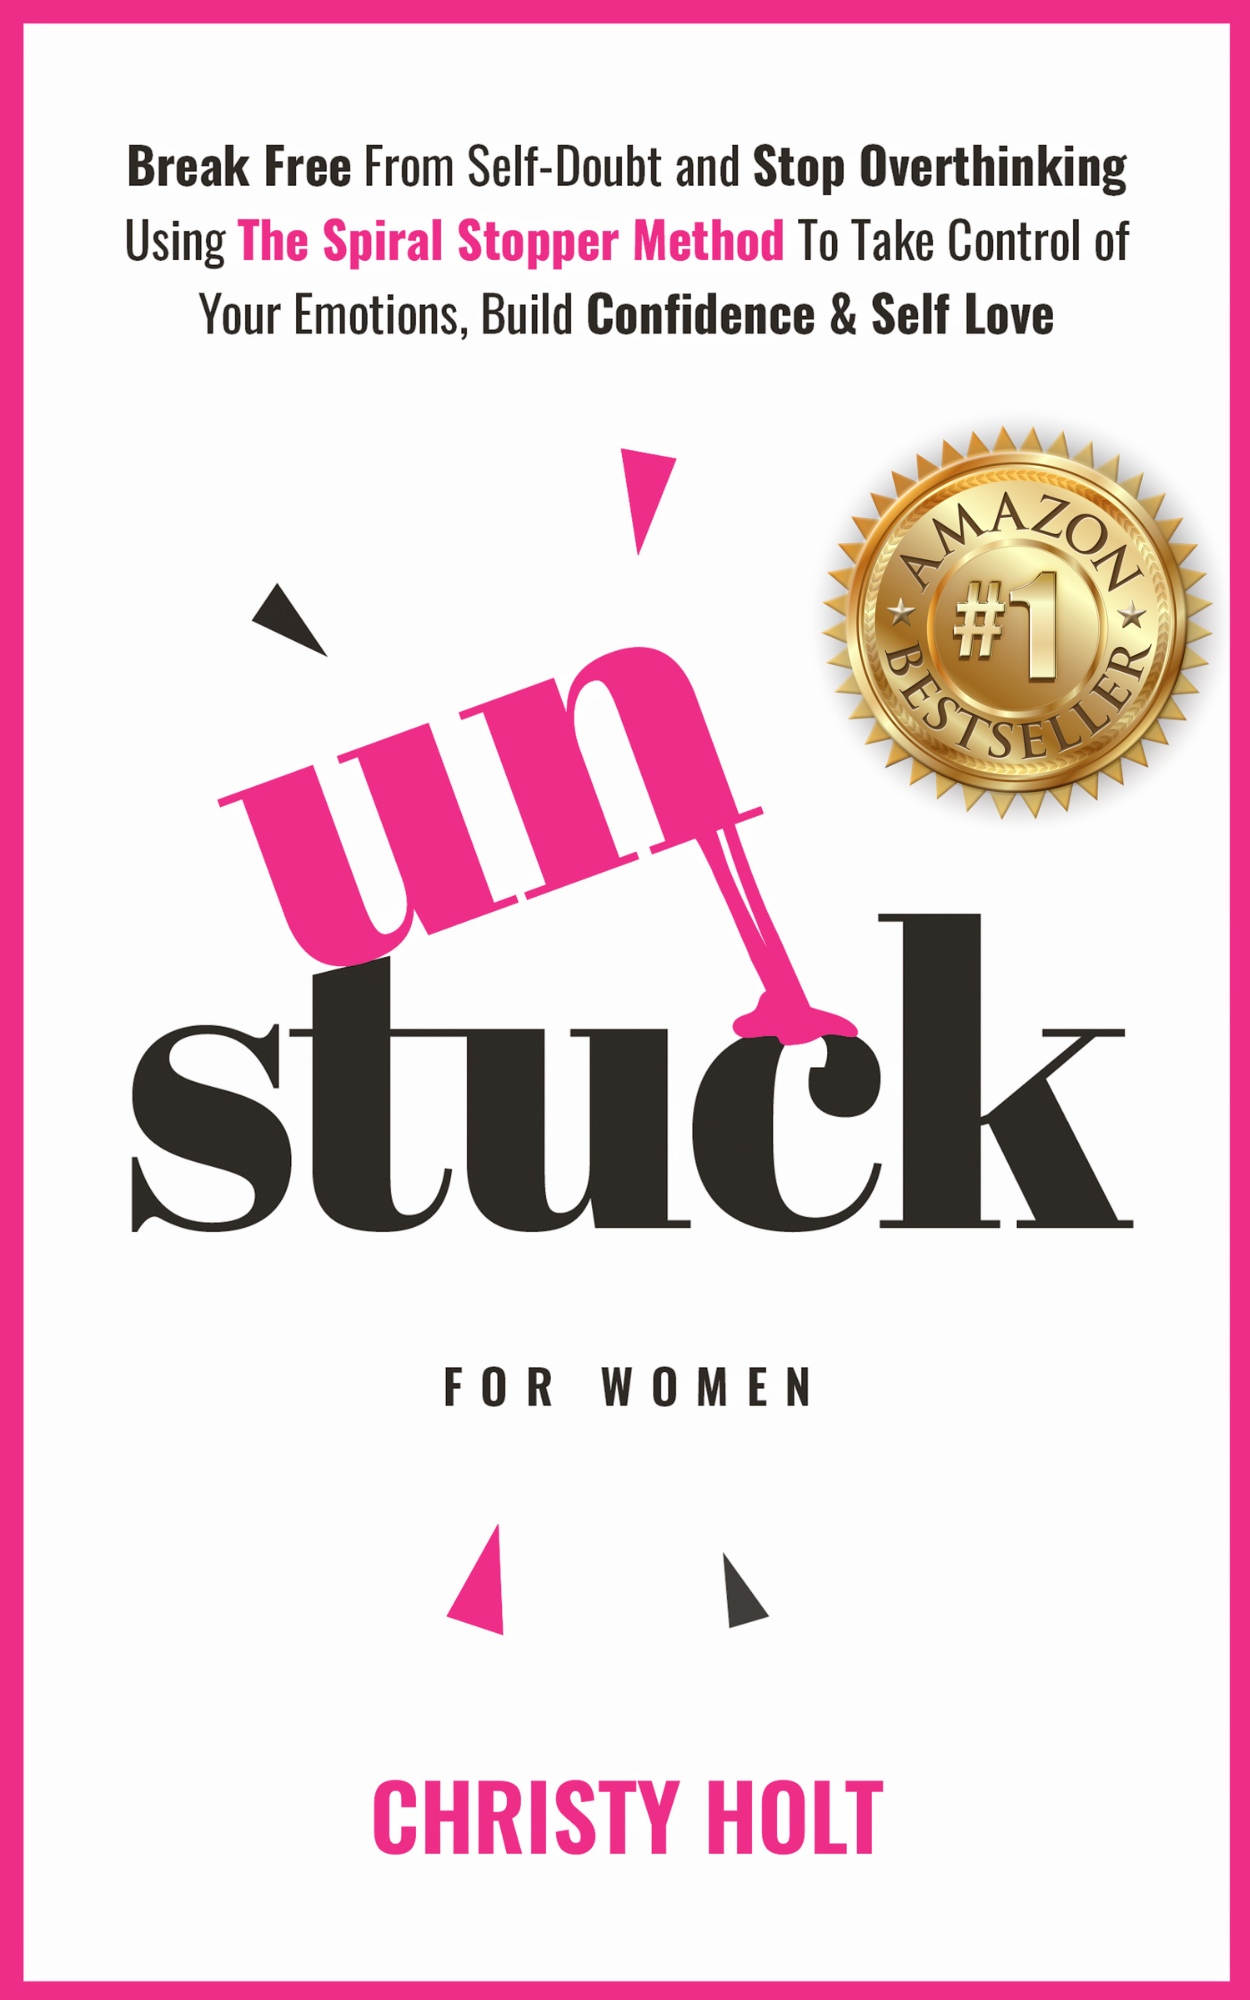 unstuck for women: Break free from self-doubt and stop overthinking using the spiral stopper method to take control of your emotions, build confidence & self love